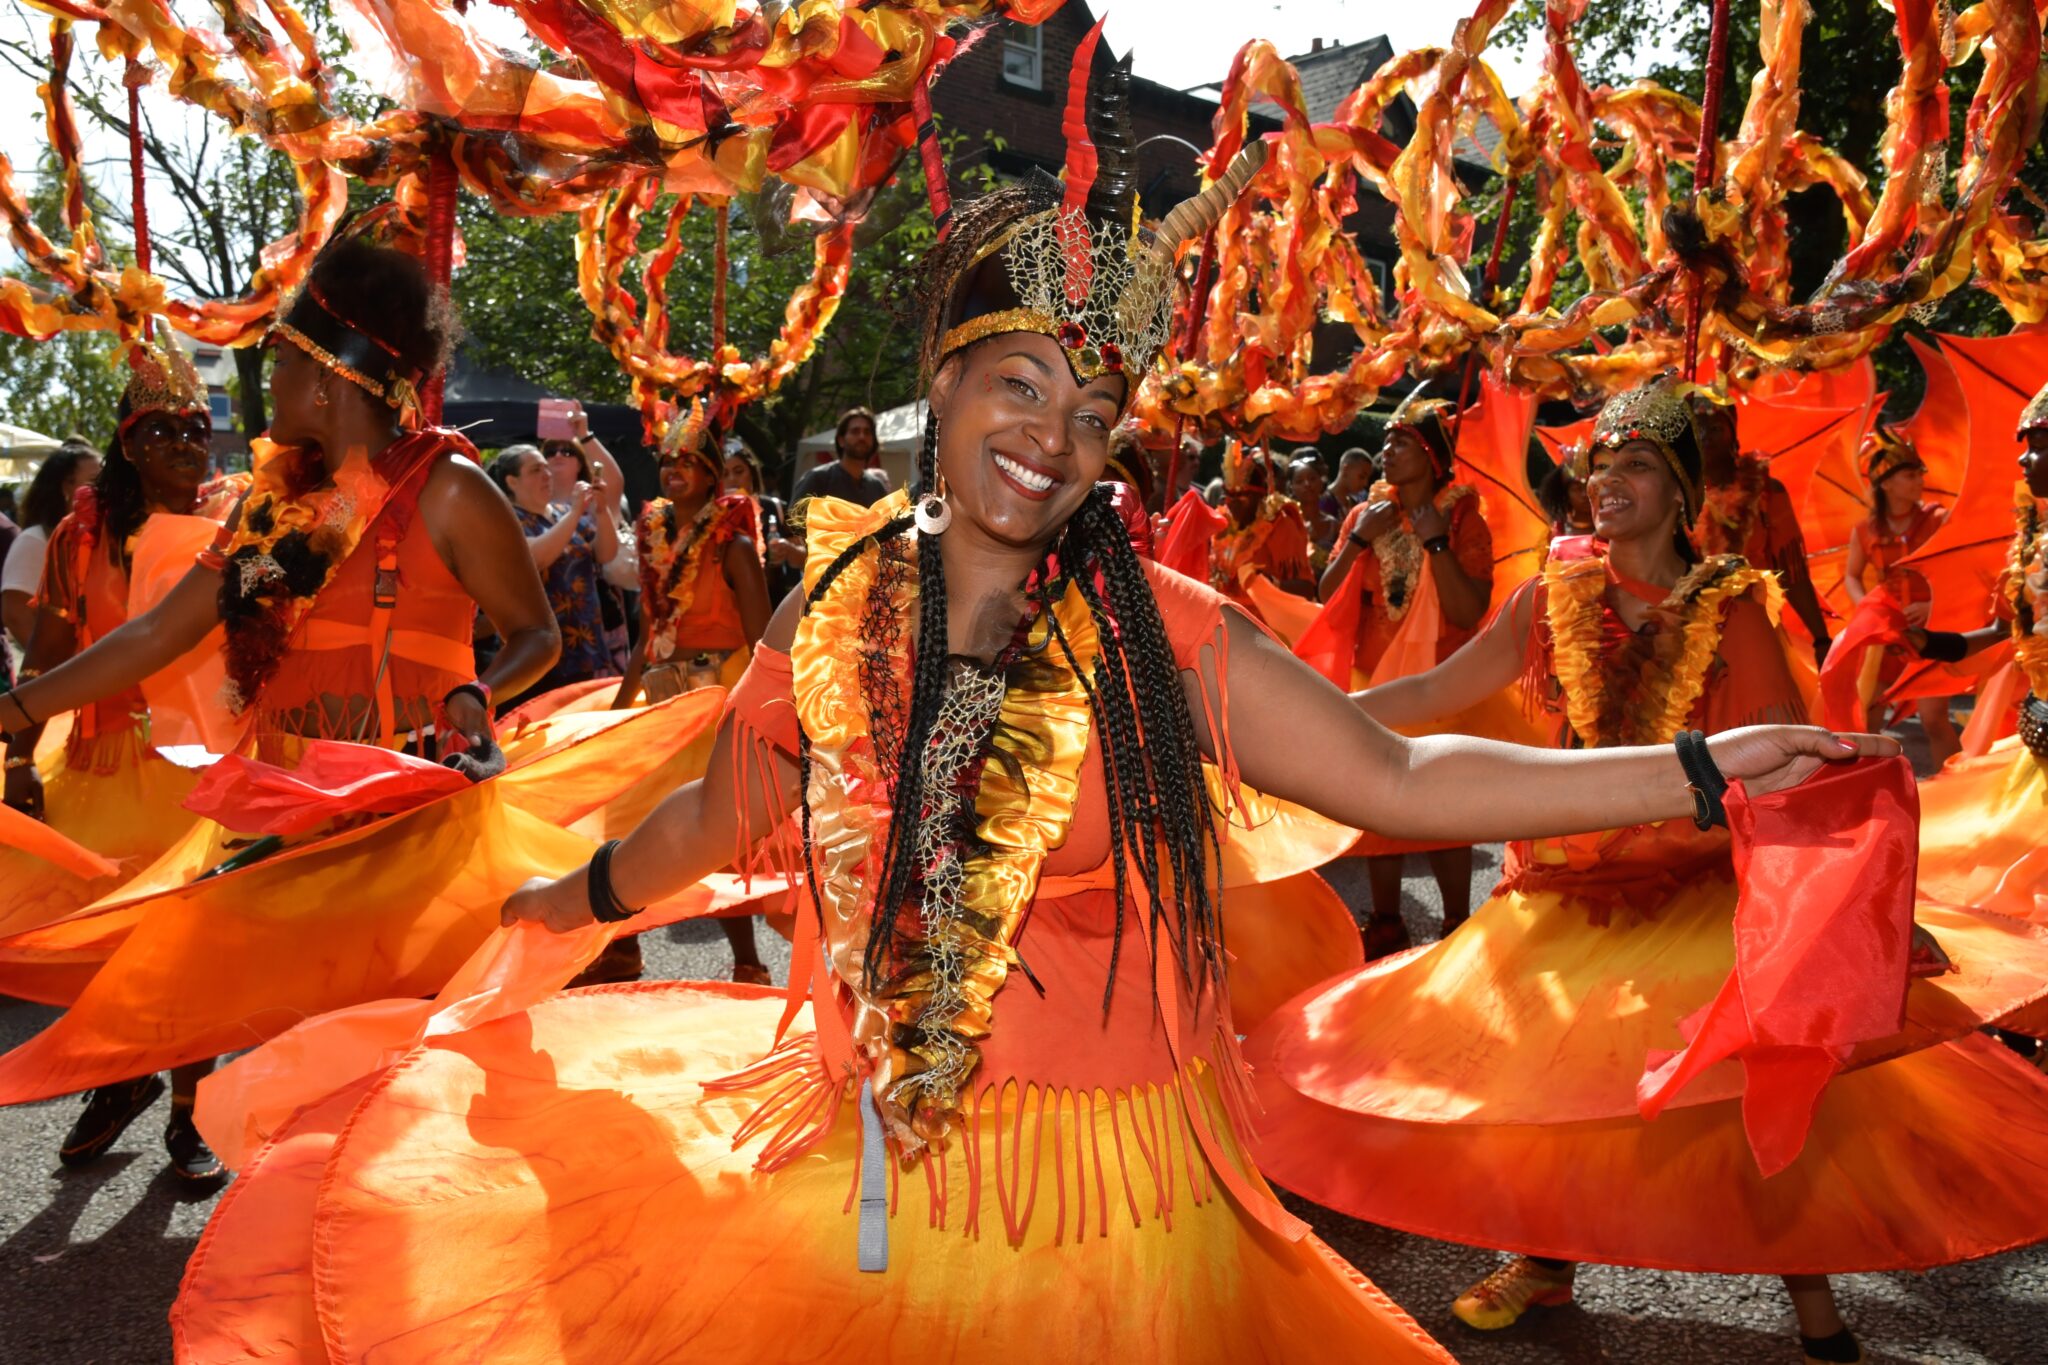 Woman dressed in a bright coloured carnival costume and head piece.